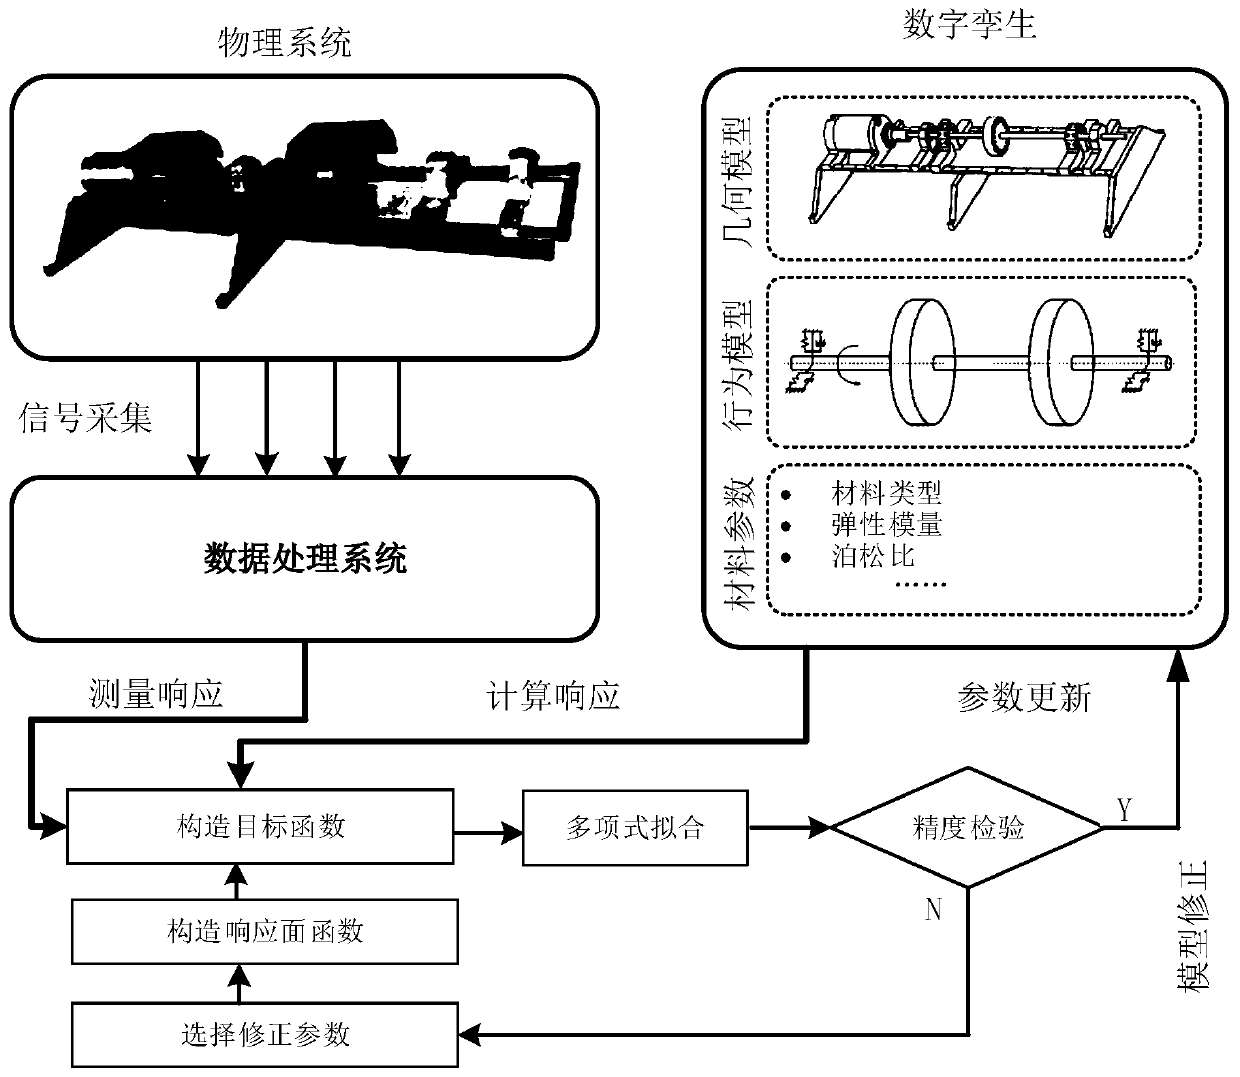 Equipment fault diagnosis method, device and system based on digital twin model